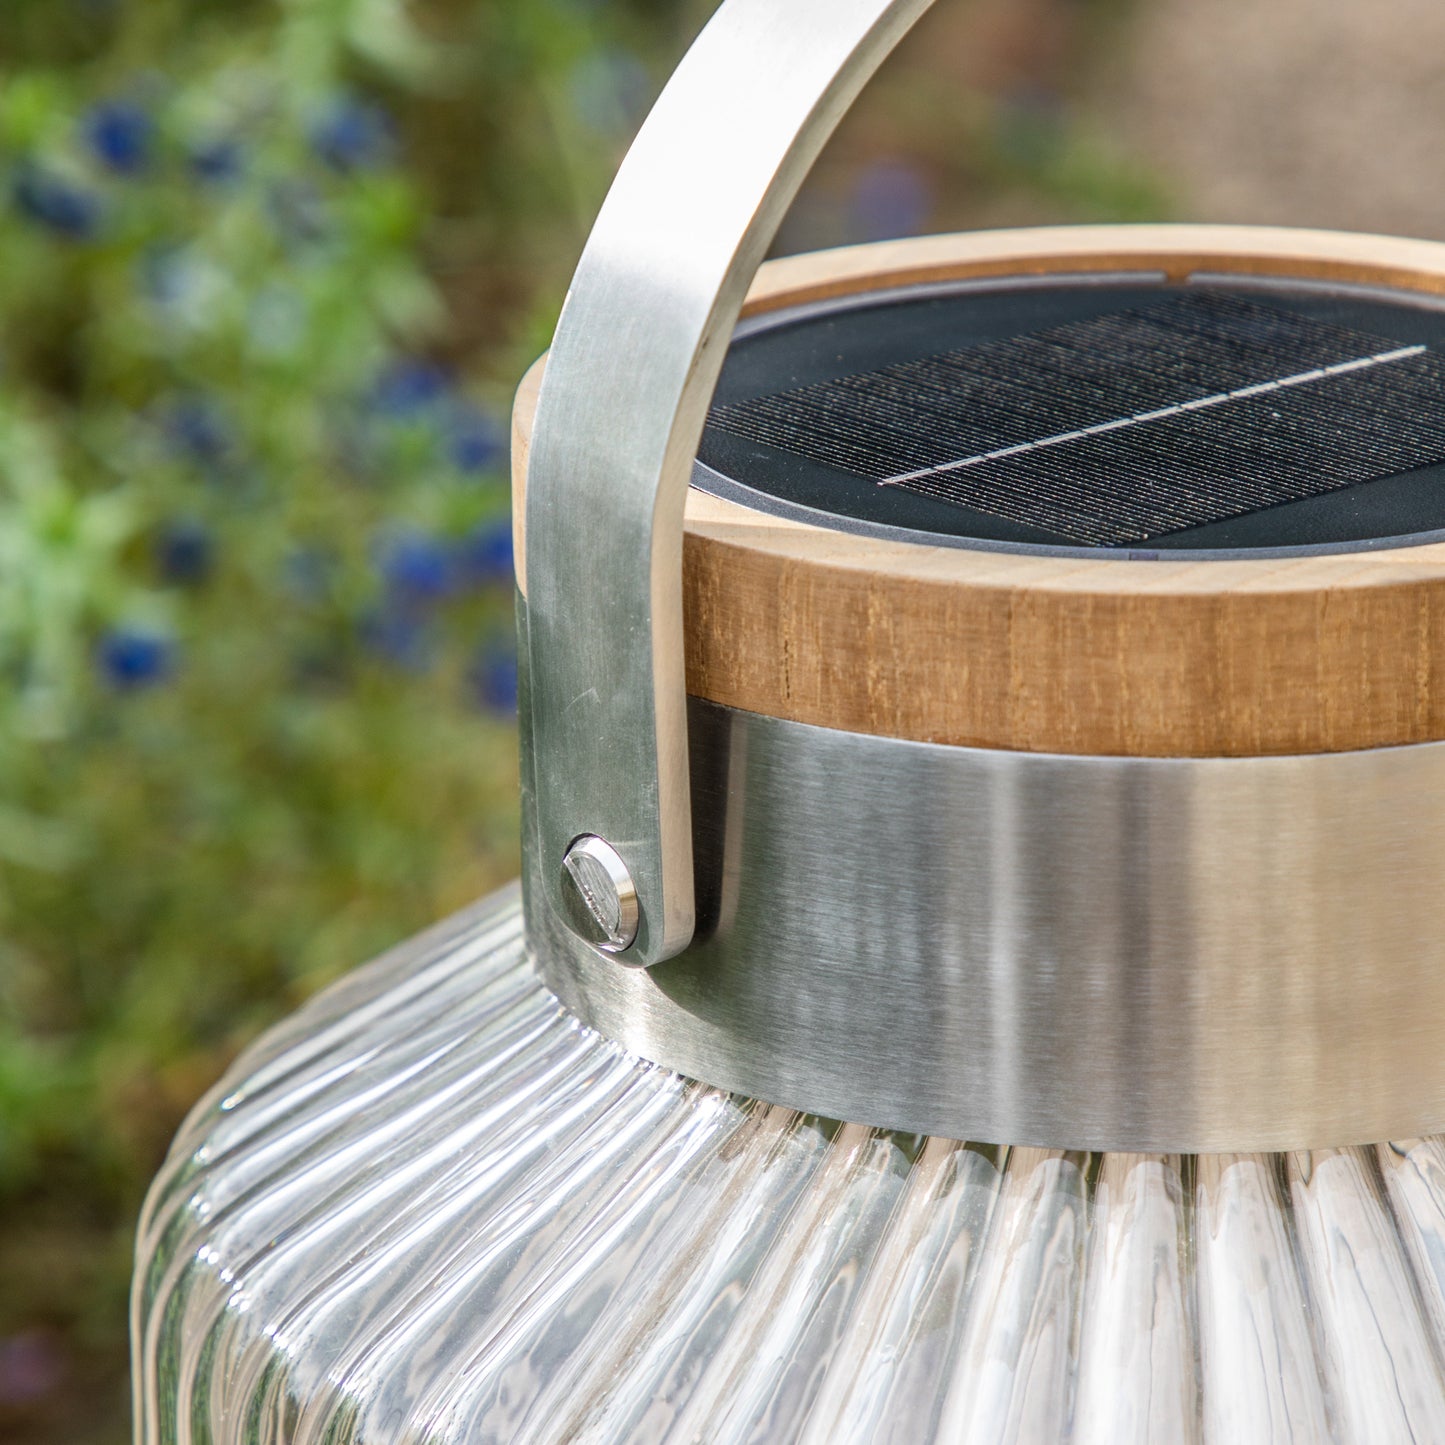 An Averton LED Solar Lantern Small with a wooden handle for interior decor.